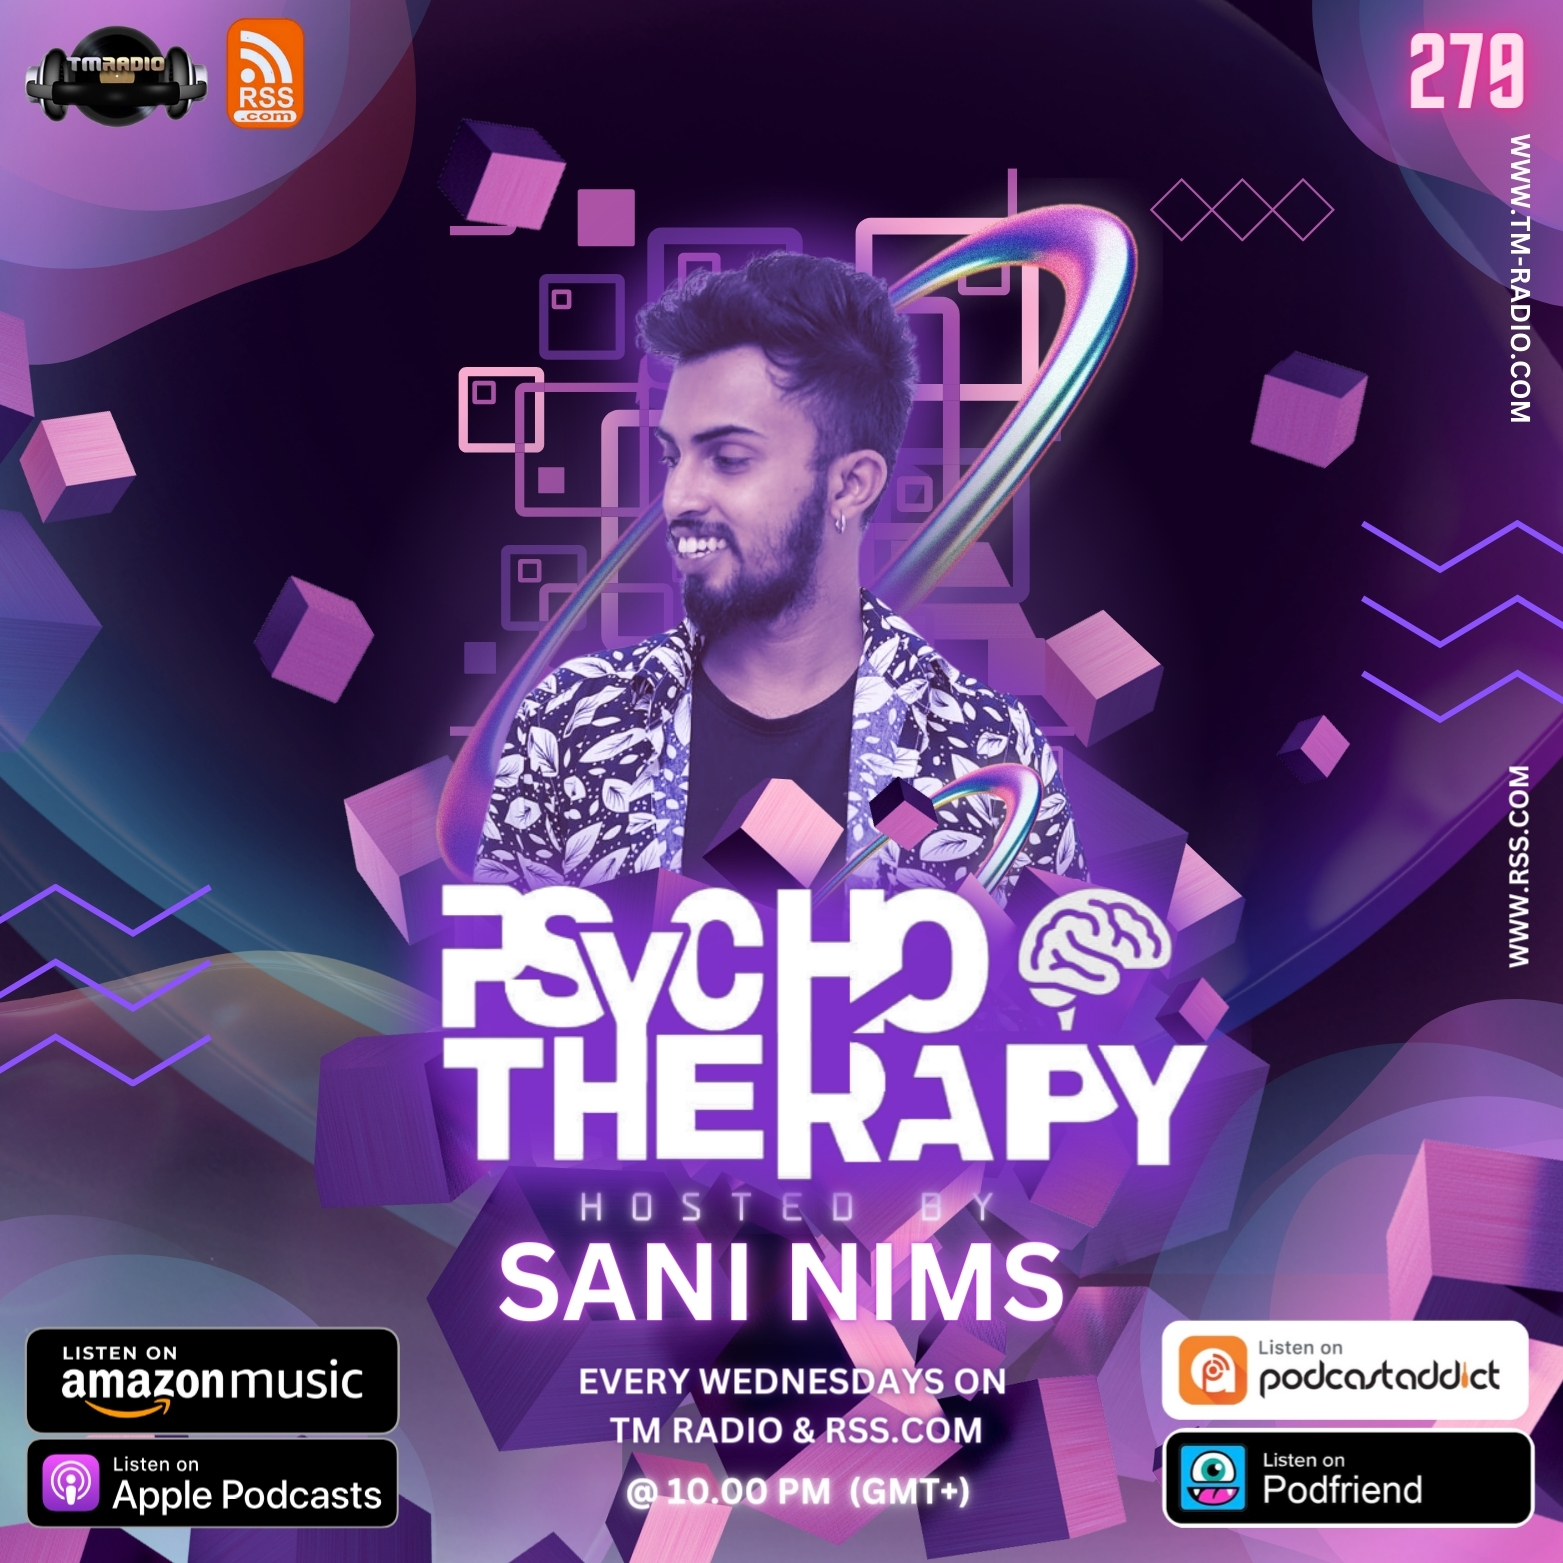 PSYCHO THERAPY EP 279 BY SANI NIMS ON TM RADIO (from February 7th)